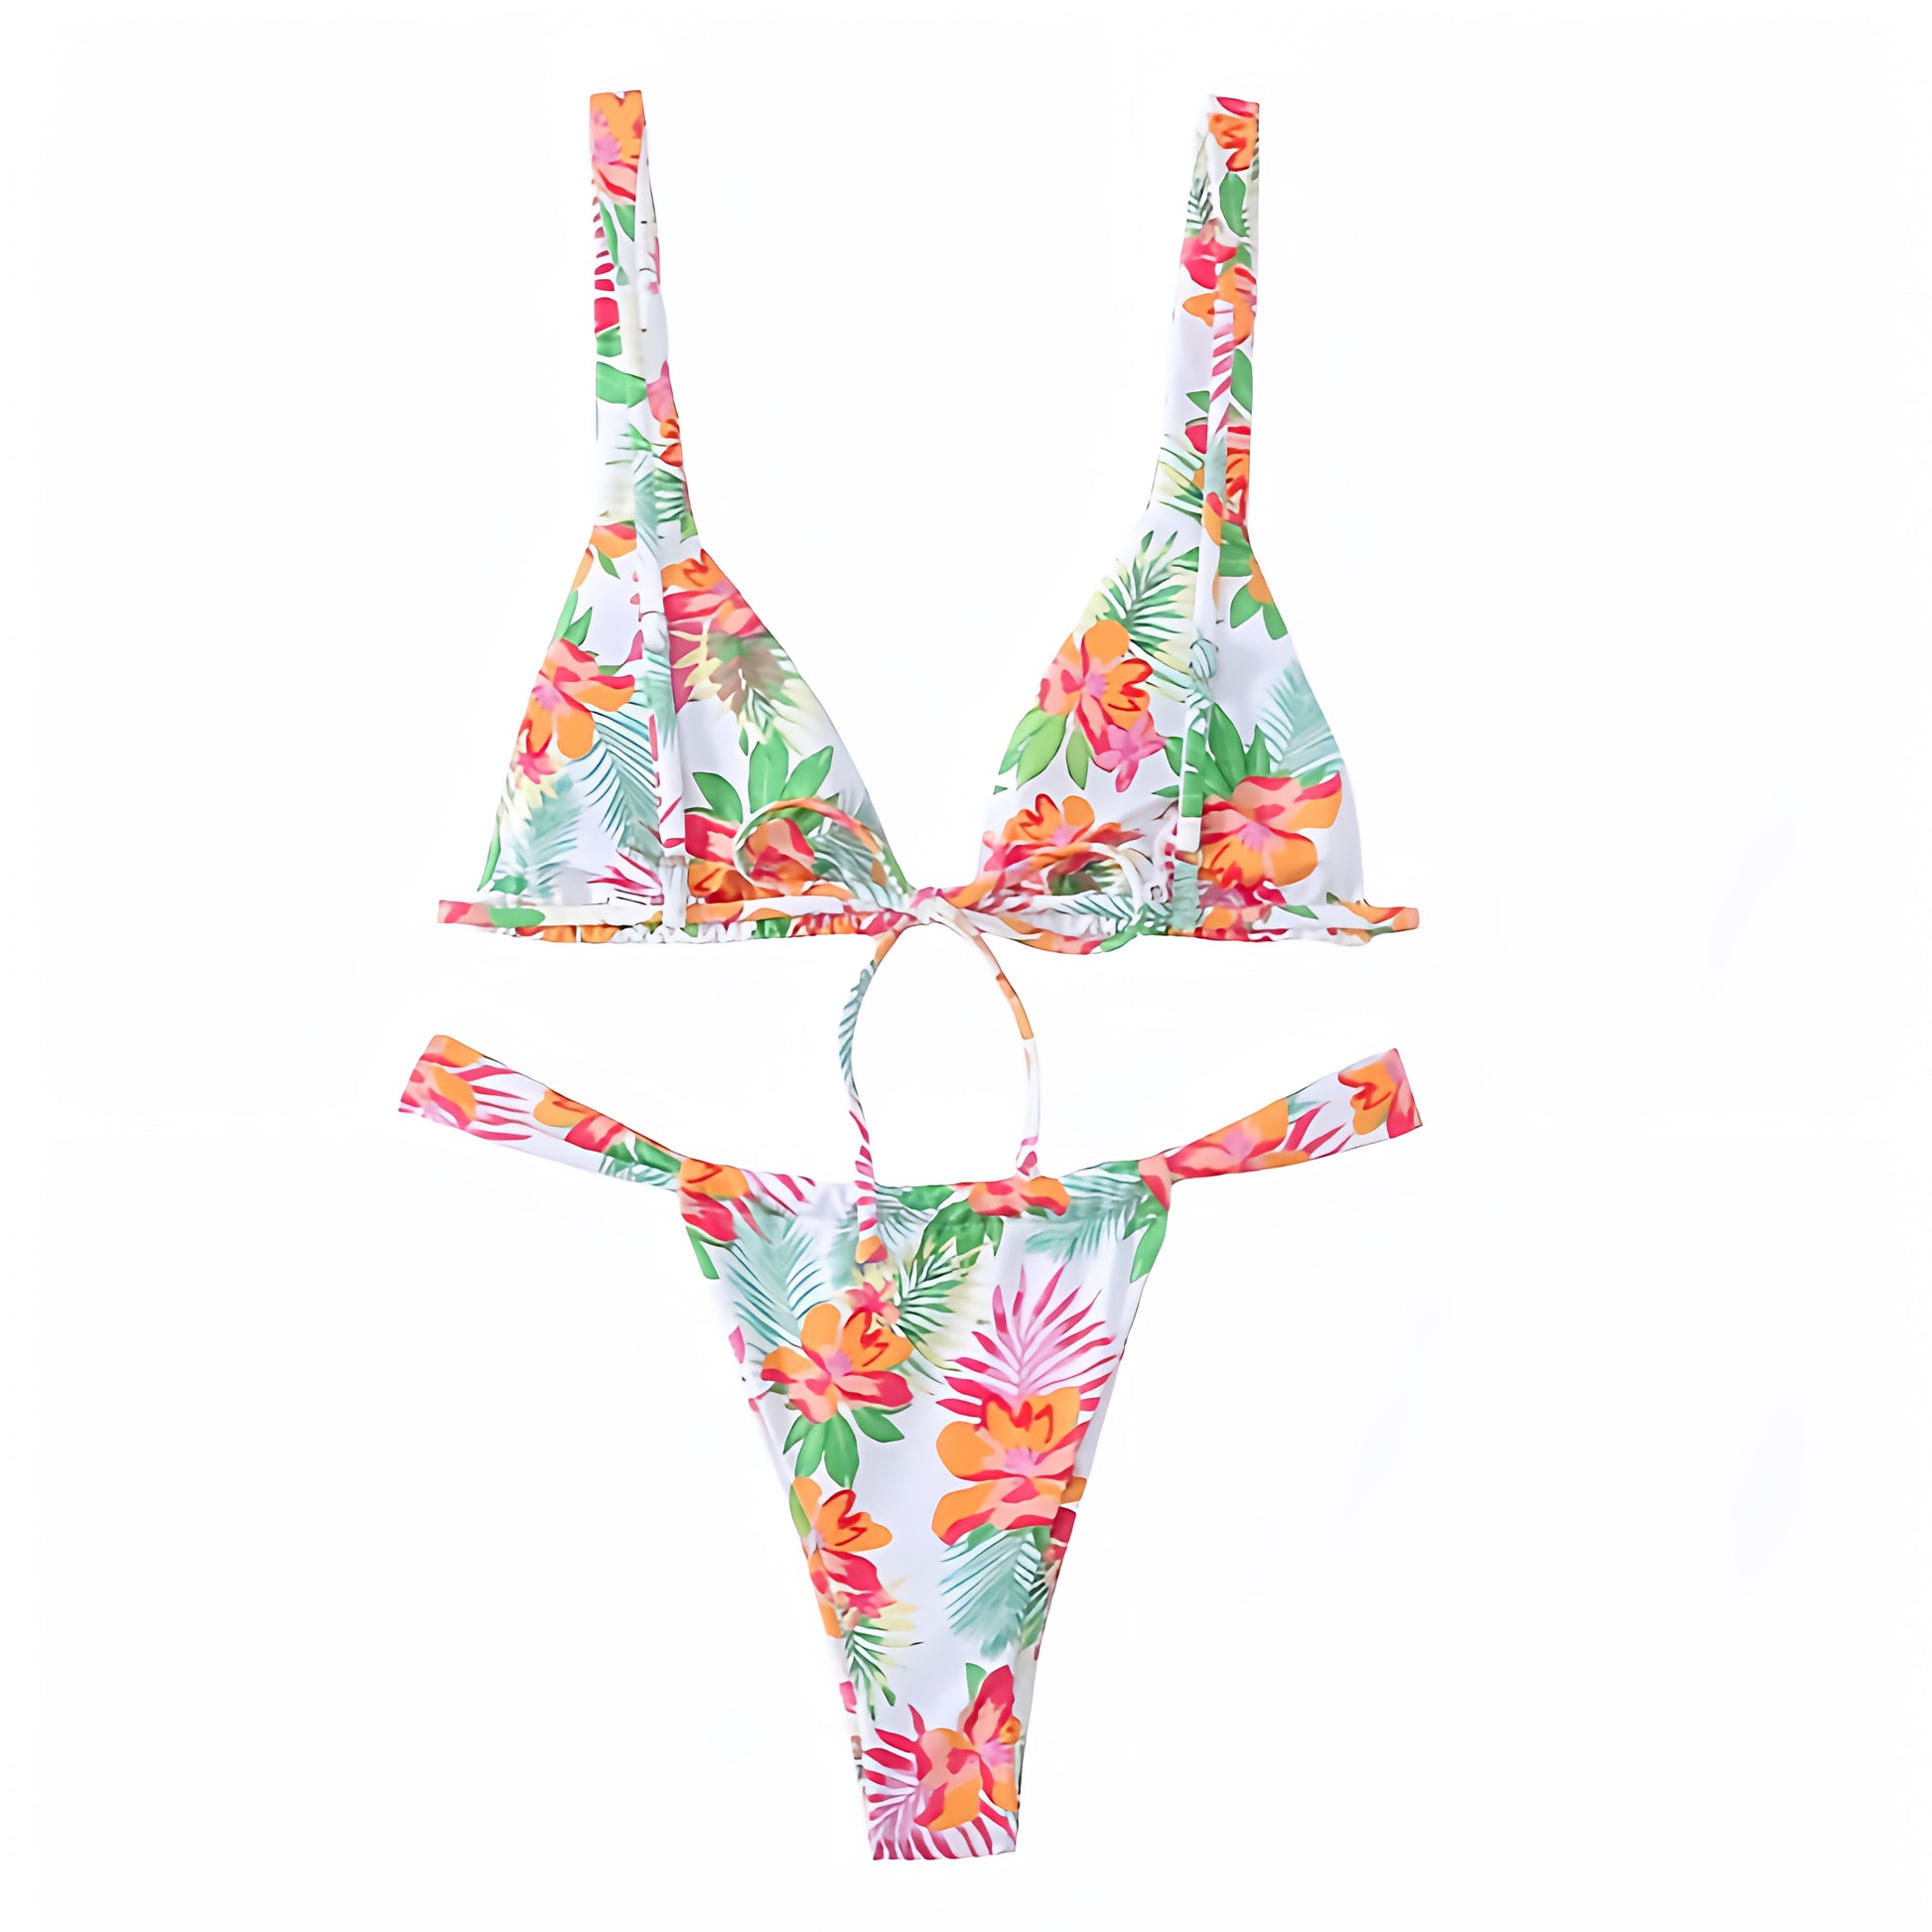 floral-print-white-pink-orange-green-multi-color-flower-patterned-v-neck-spaghetti-strap-push-up-wireless-cheeky-thong-triangle-bikini-set-two-piece-swimsuit-top-and-bottoms-swimwear-bathing-suit-women-ladies-chic-trendy-spring-2024-summer-preppy-style-tropical-hawaiian-vacation-beach-wear-malibu-barbie-black-bough-kula-kinis